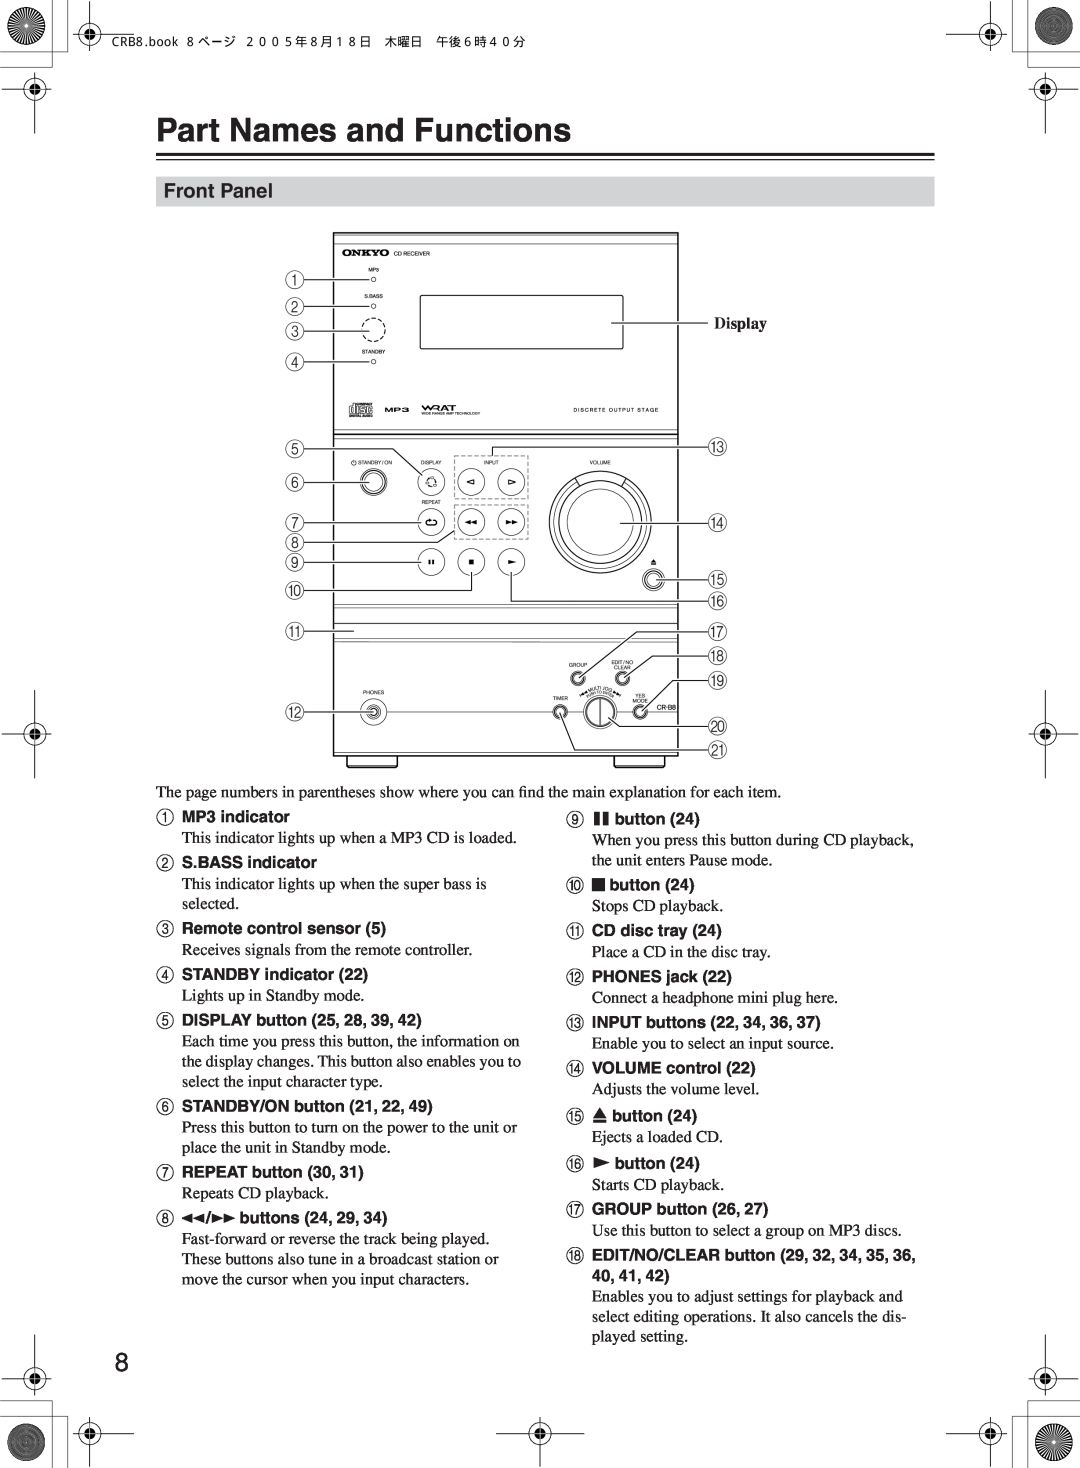 Onkyo CR-B8 instruction manual Part Names and Functions, Front Panel 